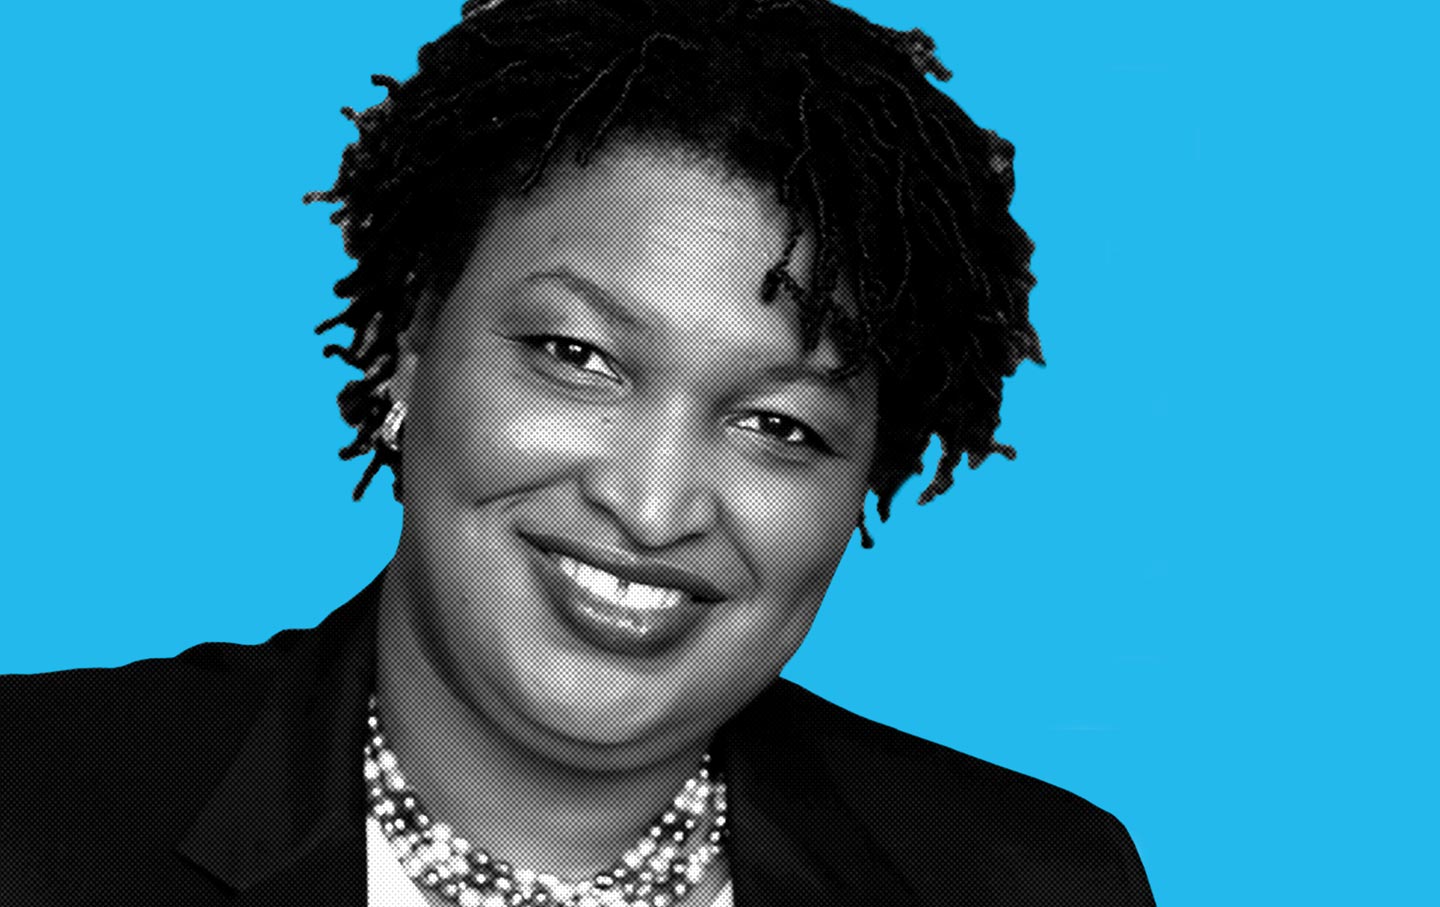 Voting Rights Champion Stacey Abrams Endorses Karen Carter